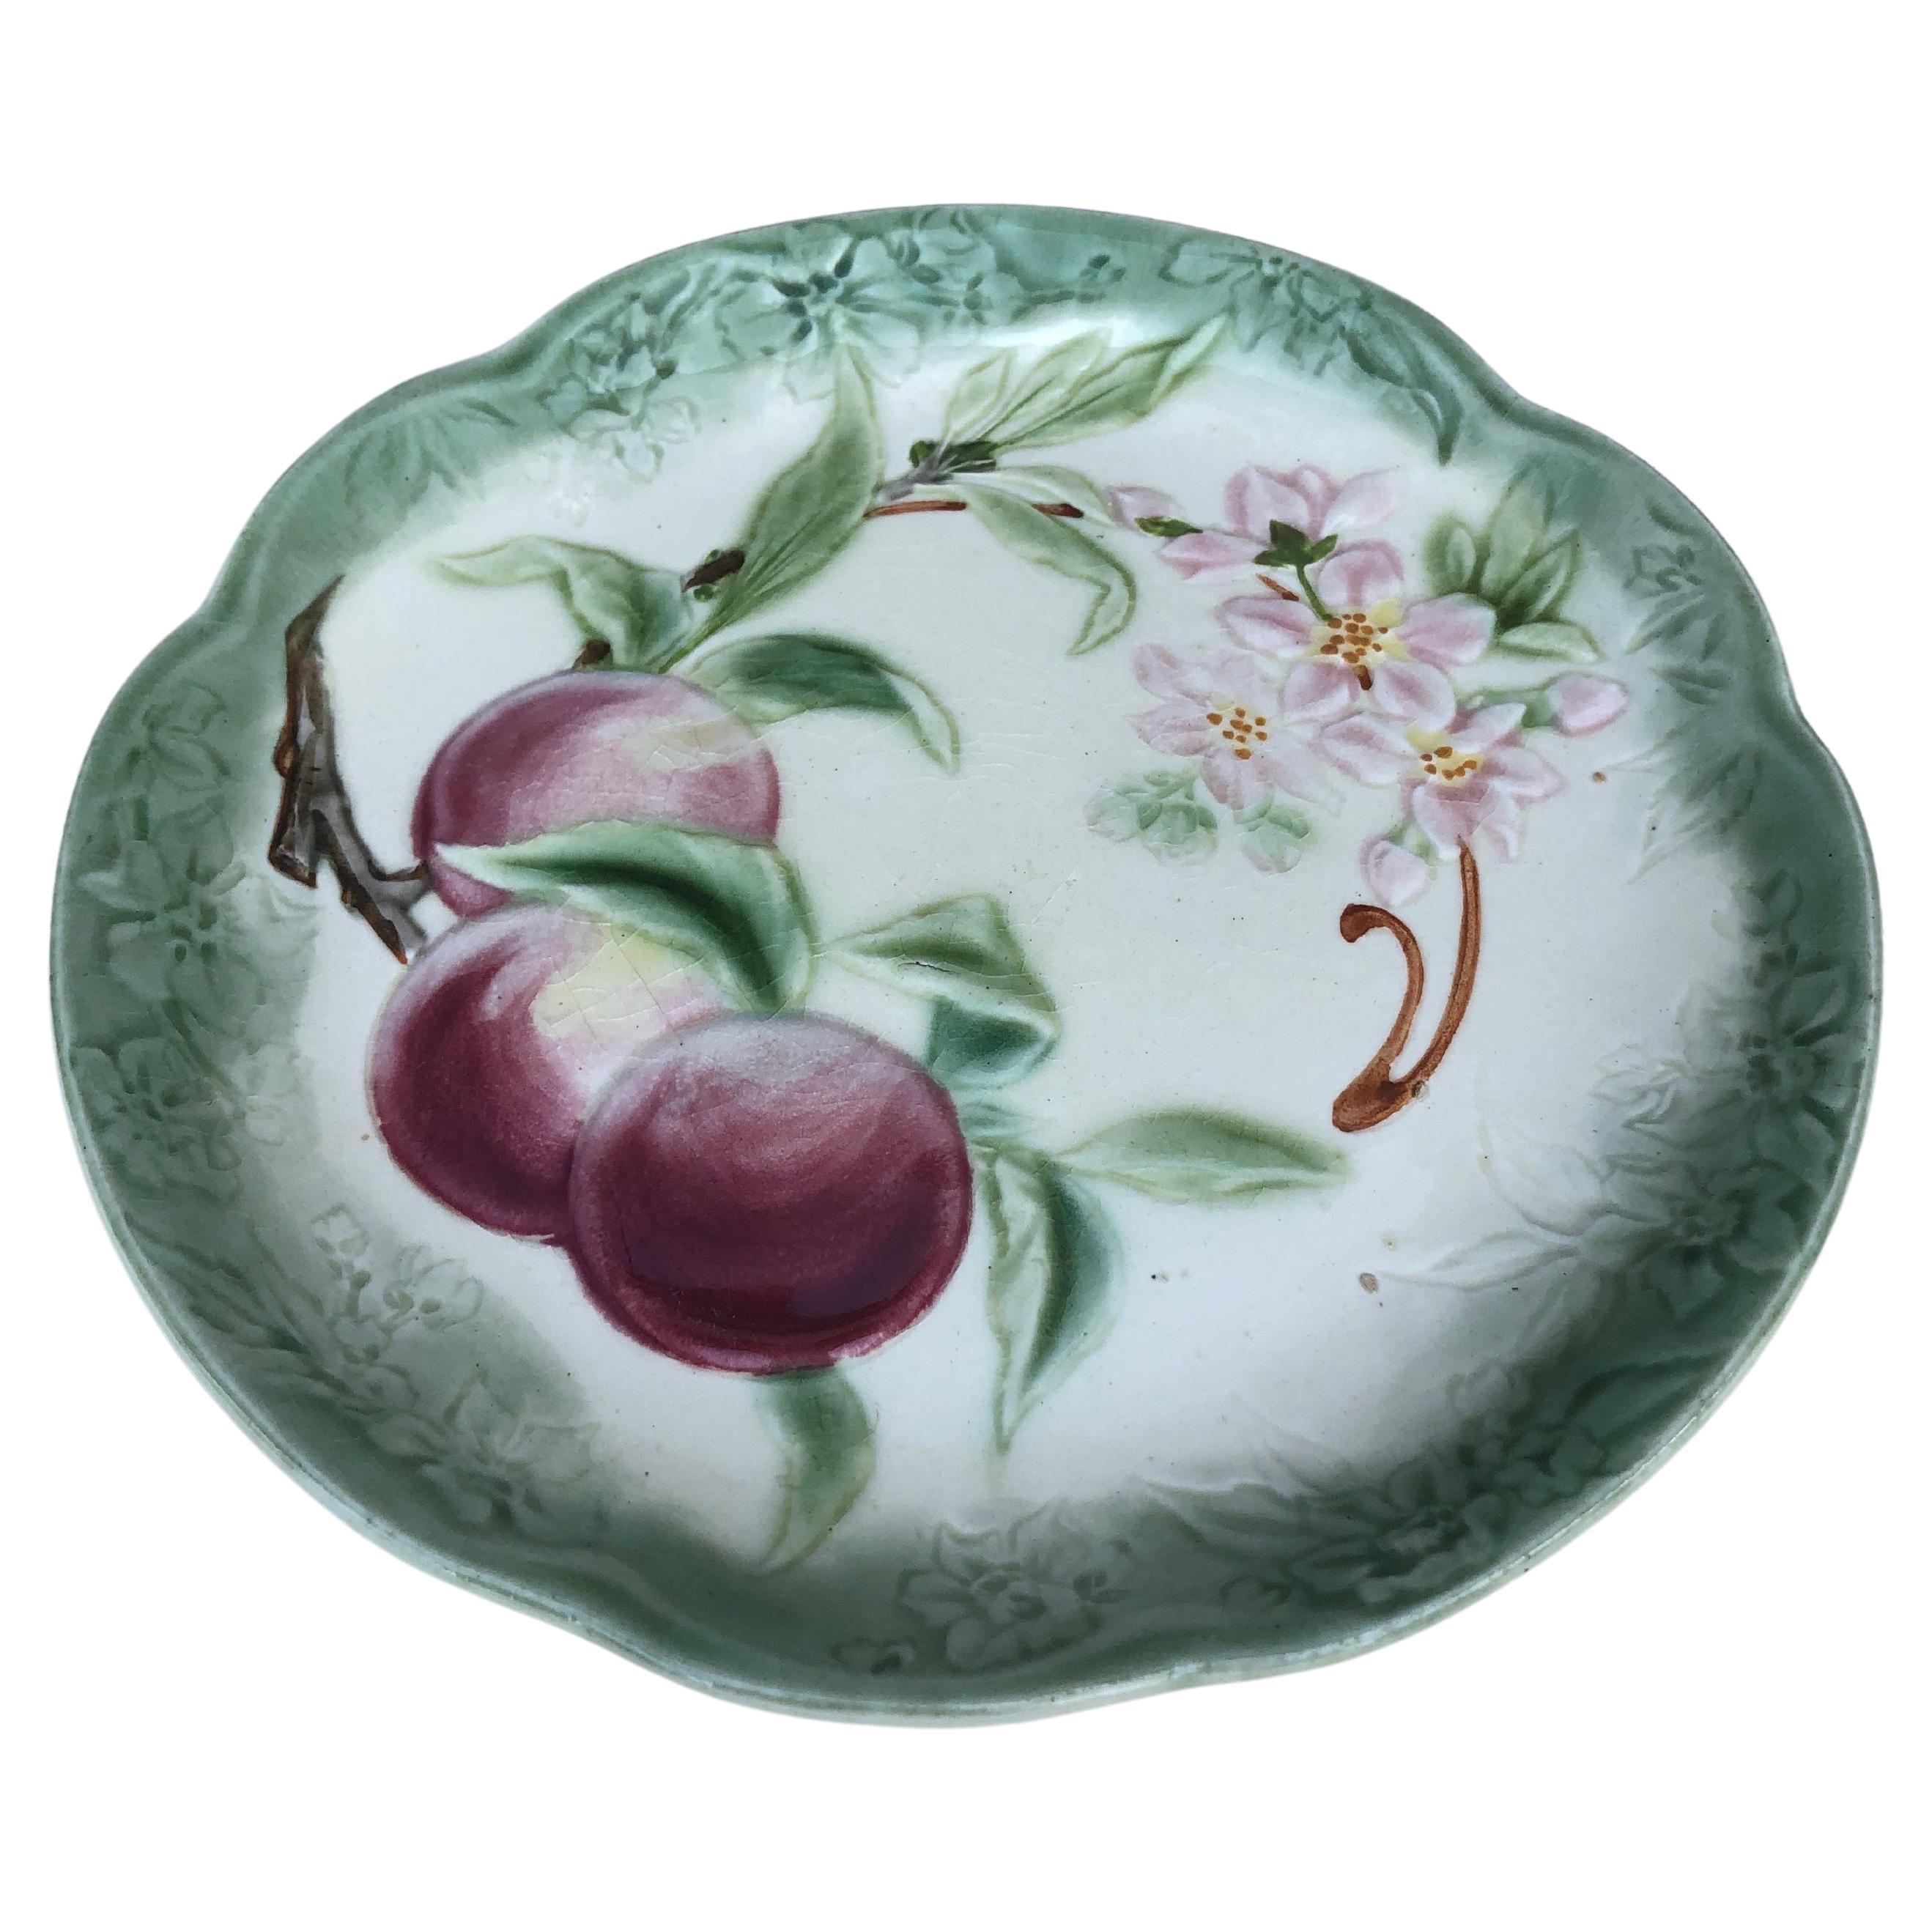 19th Century Majolica apples plate signed Choisy Le Roi.
Made for Higgins & Setter New York.
The Higgins & Seiter Company of New York City began selling decorations for the table, including rich-cut glass in 1887. By 1891 the firm was